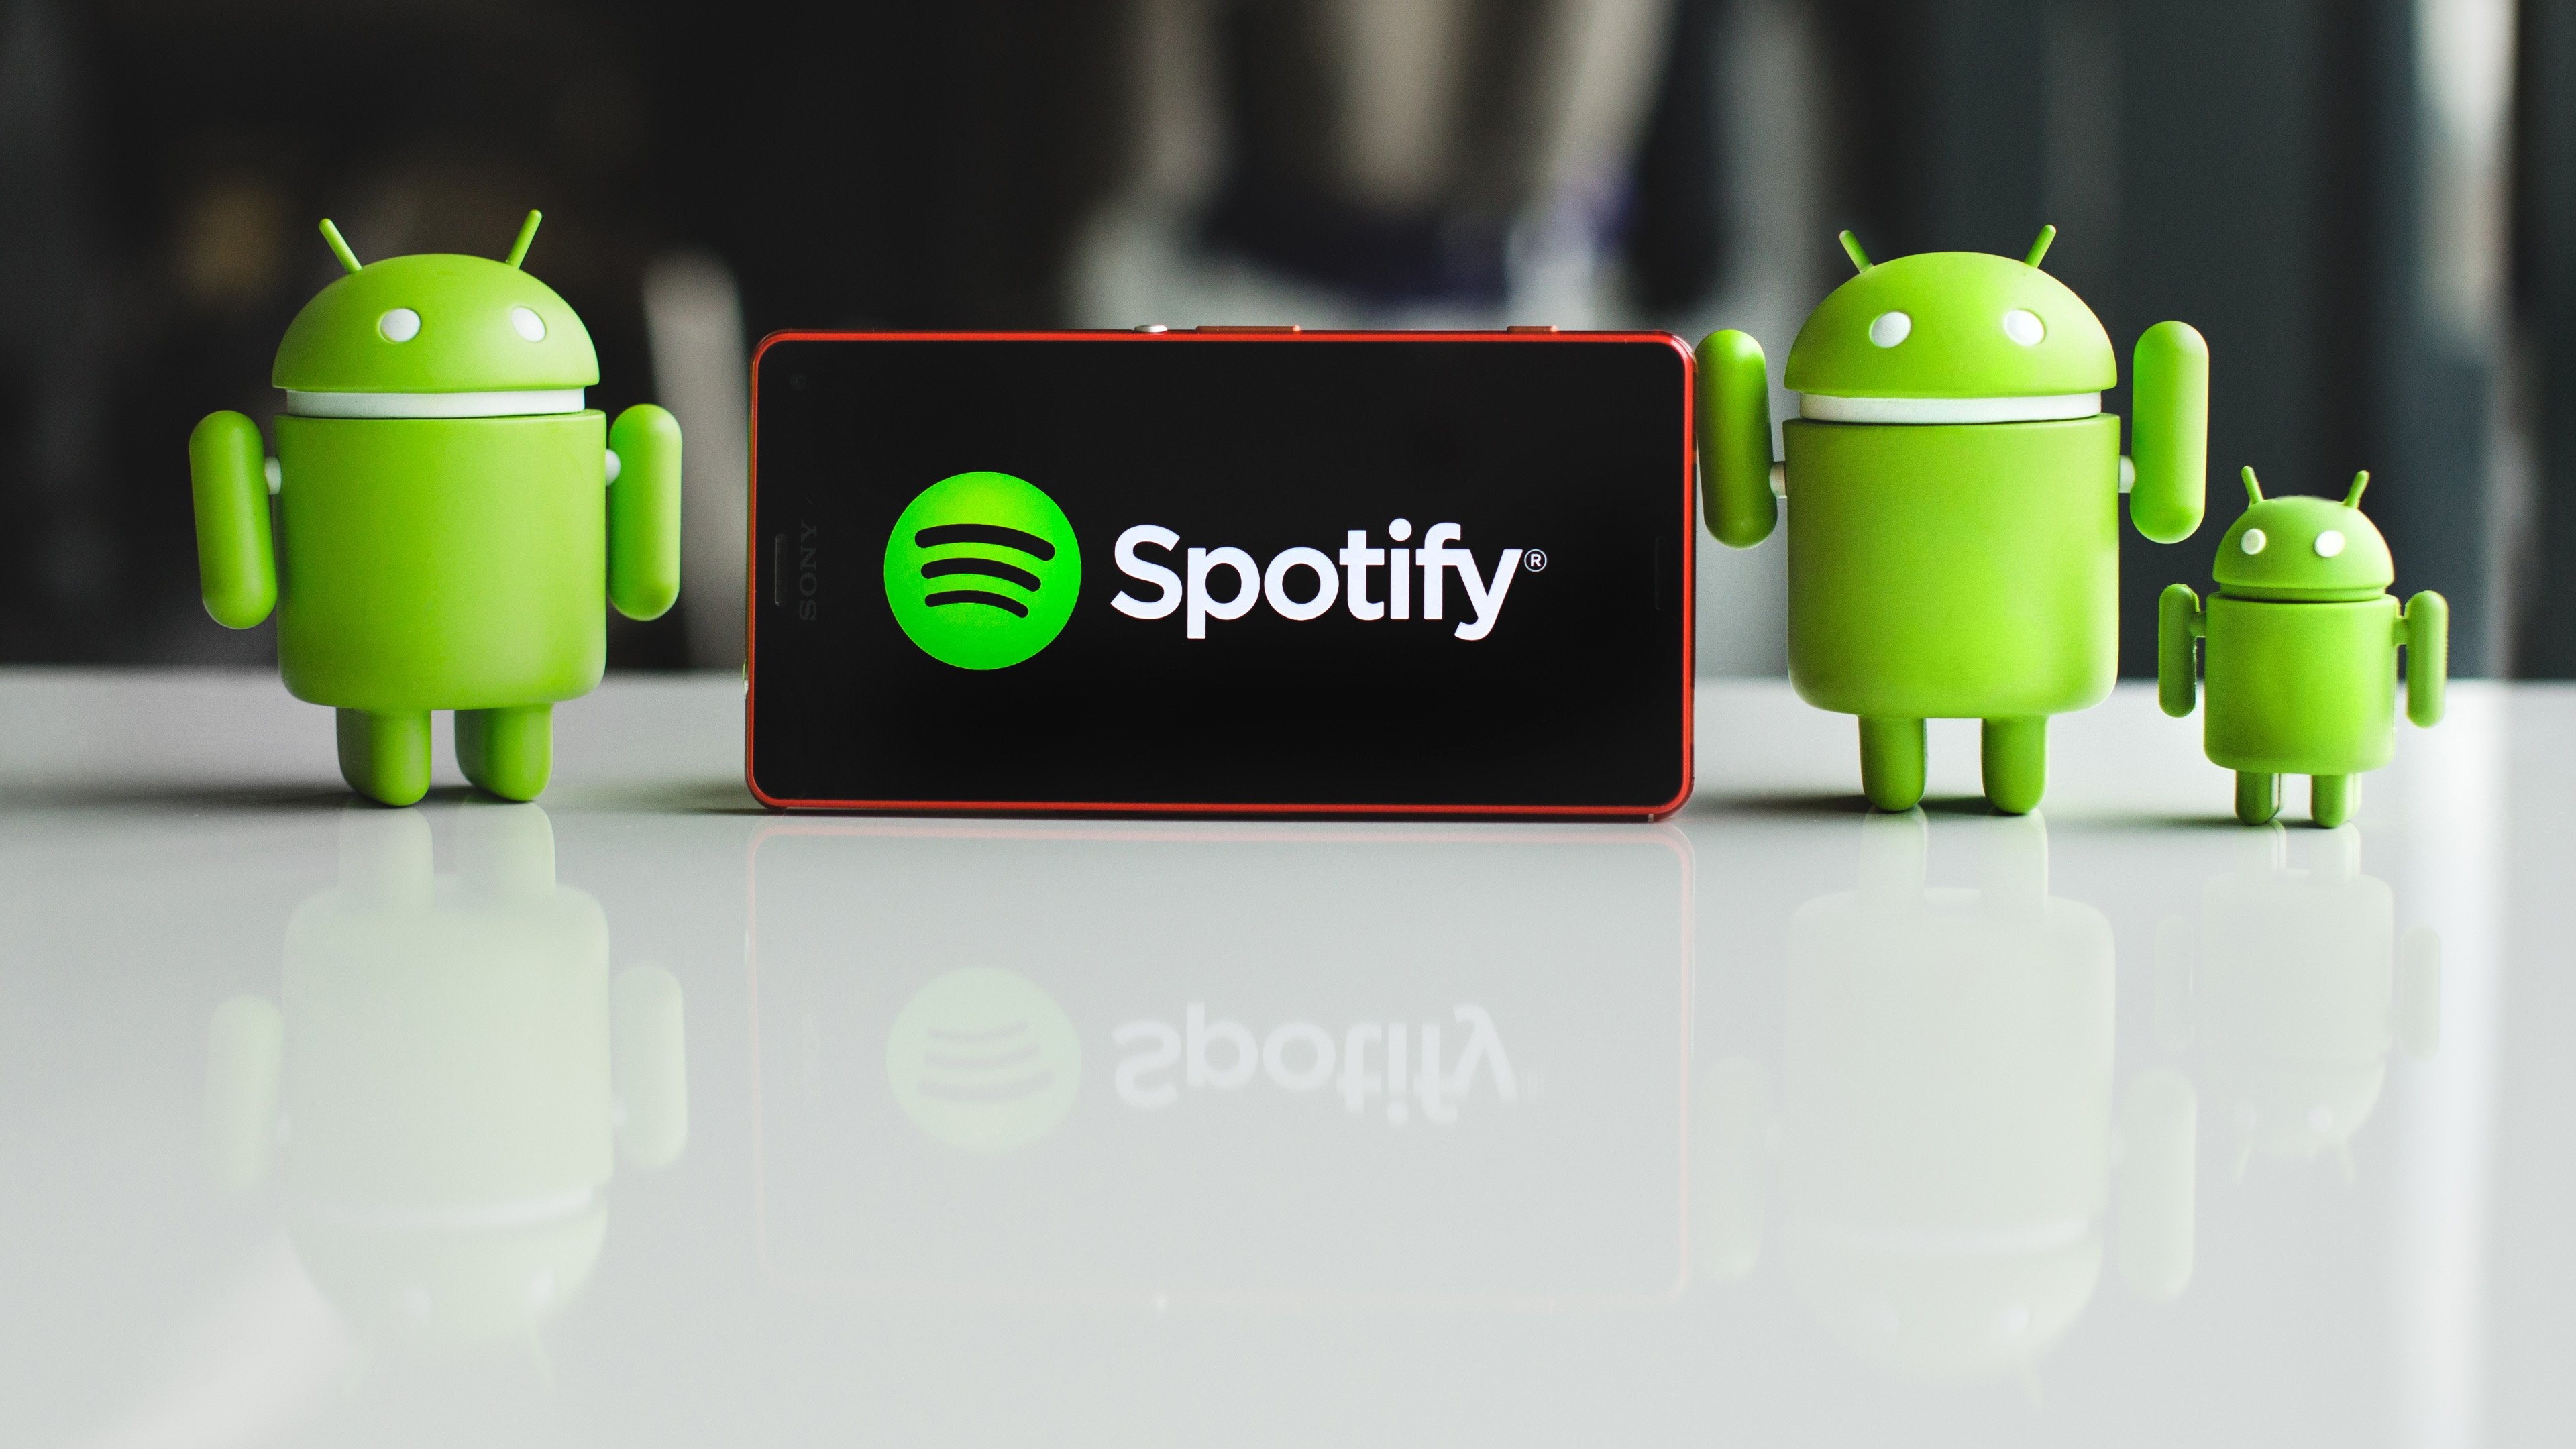 Spotify: One of the most widely-used music streaming services in the world, 422 million active users. 3840x2160 4K Wallpaper.